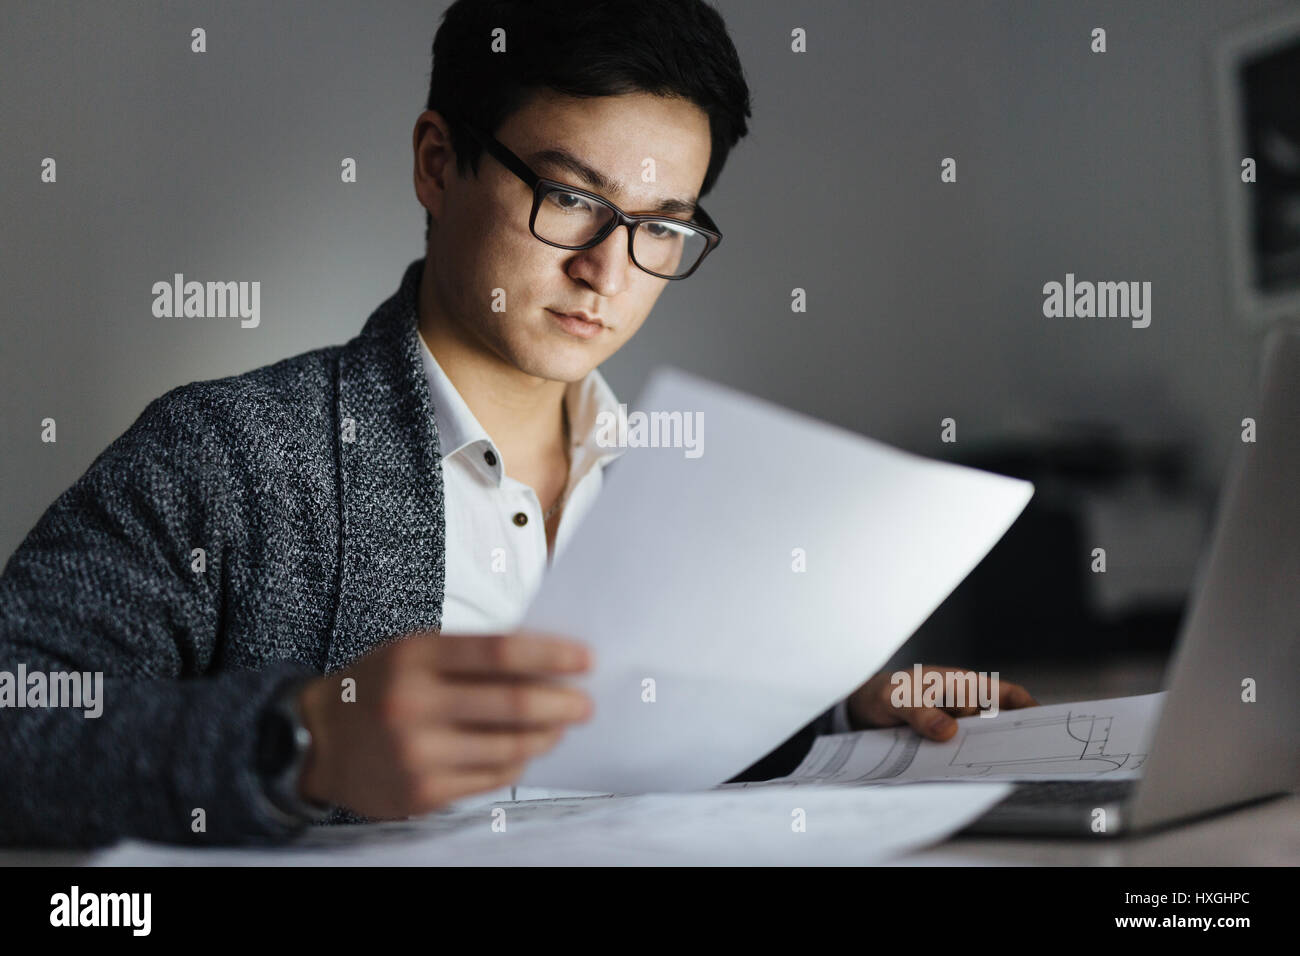 Portrait of busy Asian man wearing glasses and casual wear sorting documentation and working with laptop in dark room late at night, his face lit up b Stock Photo